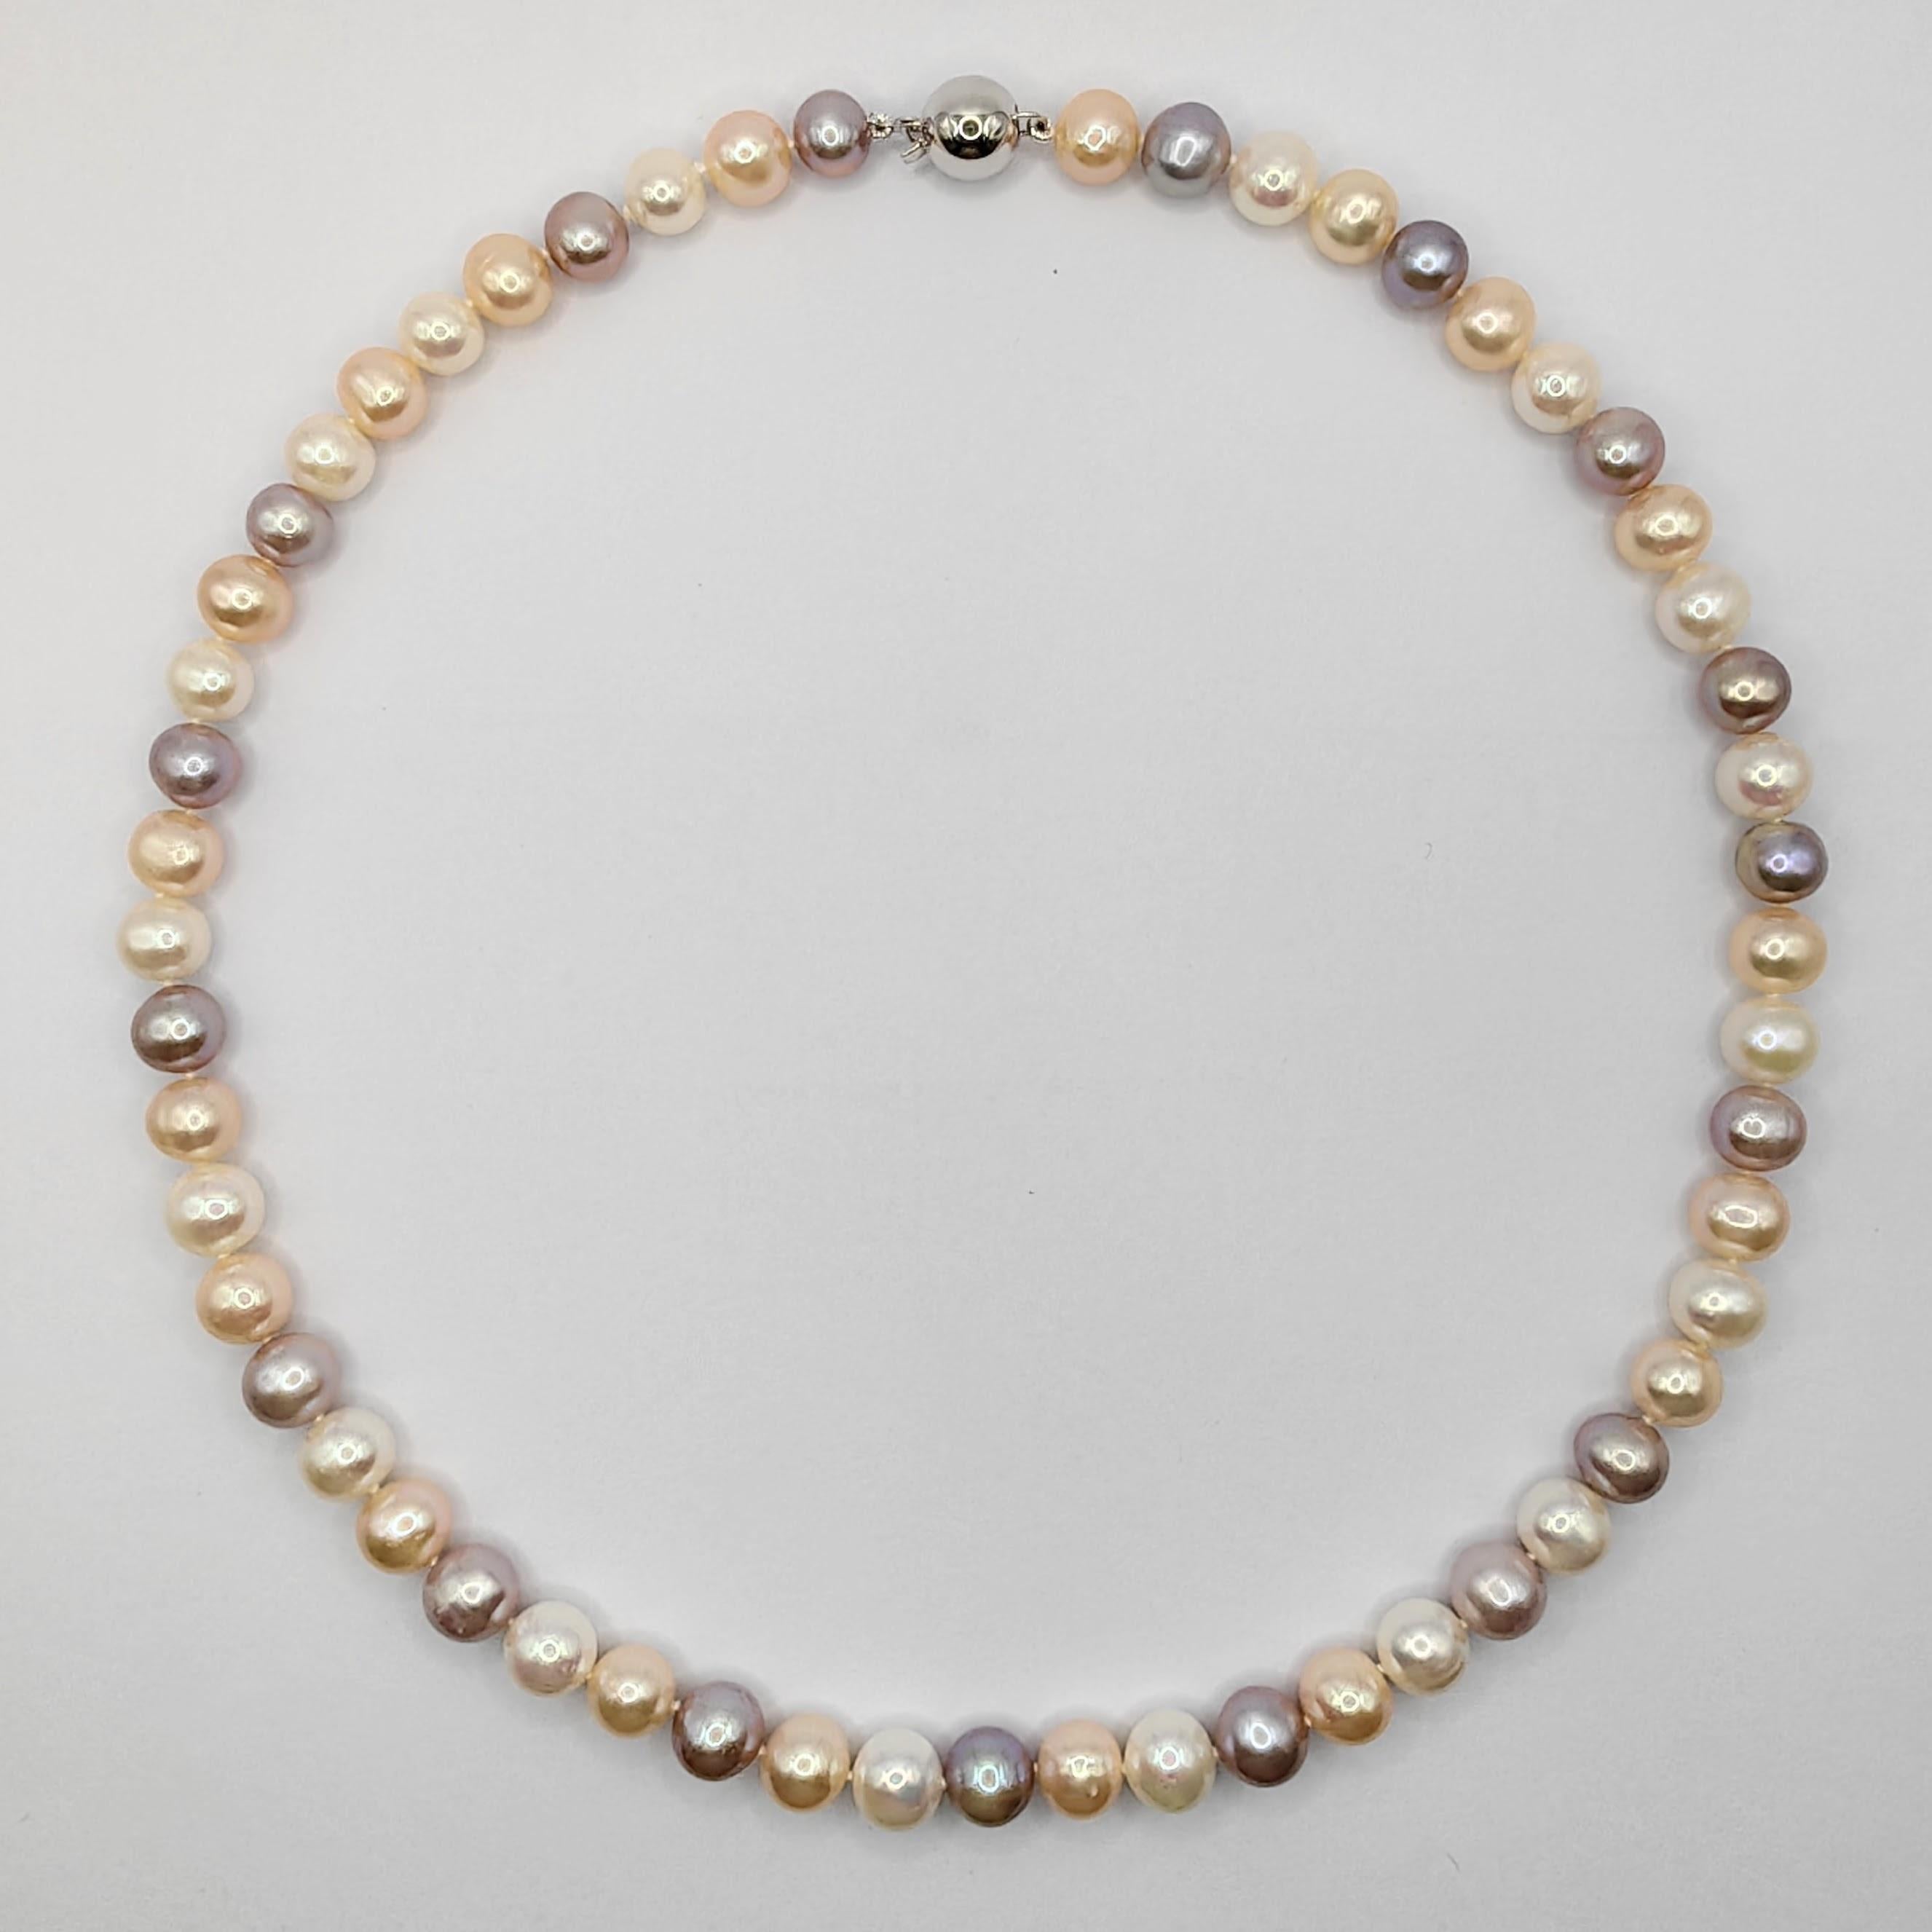 Introducing our 18-inch 7-8mm Multi-color Pink Peach White Round Pearl Necklace, a beautifully hand-knotted accessory that adds a touch of sophistication and style to both men's and women's wardrobes. These candy-colored pearls, with their